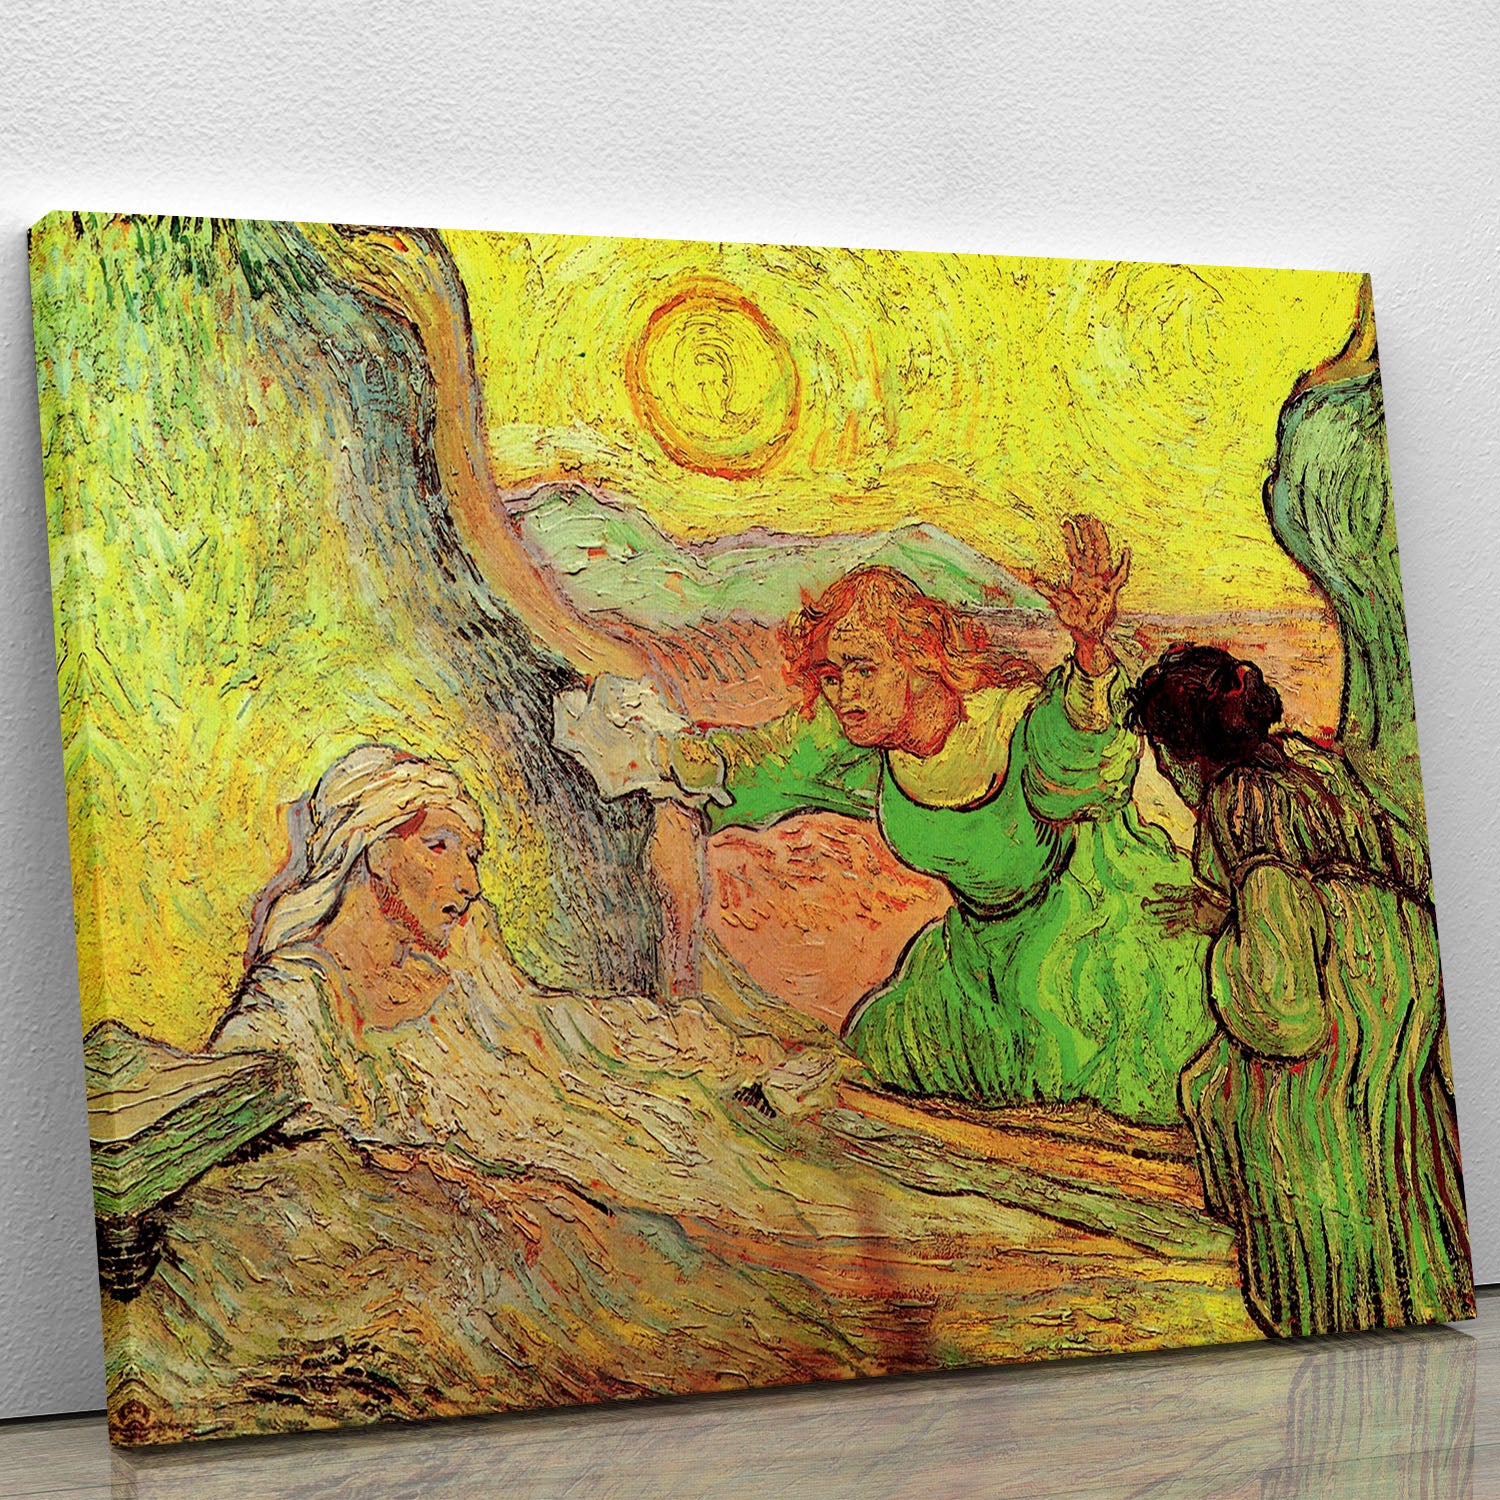 The Raising of Lazarus after Rembrandt by Van Gogh Canvas Print or Poster - Canvas Art Rocks - 1